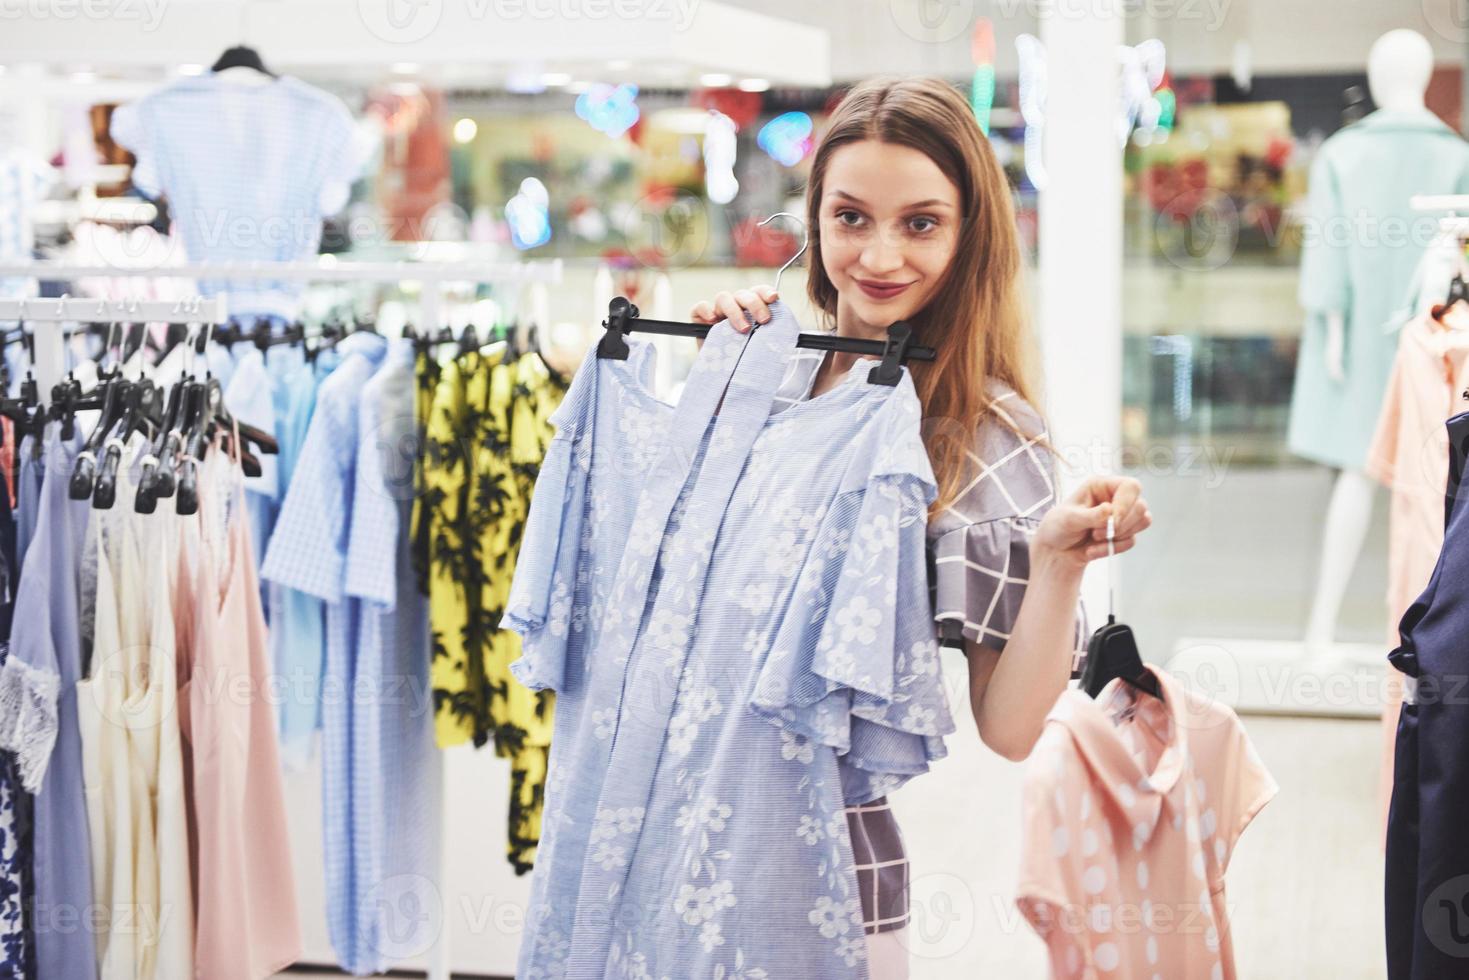 sale, fashion, consumerism and people concept - happy young woman with shopping bags choosing clothes in mall or clothing store photo